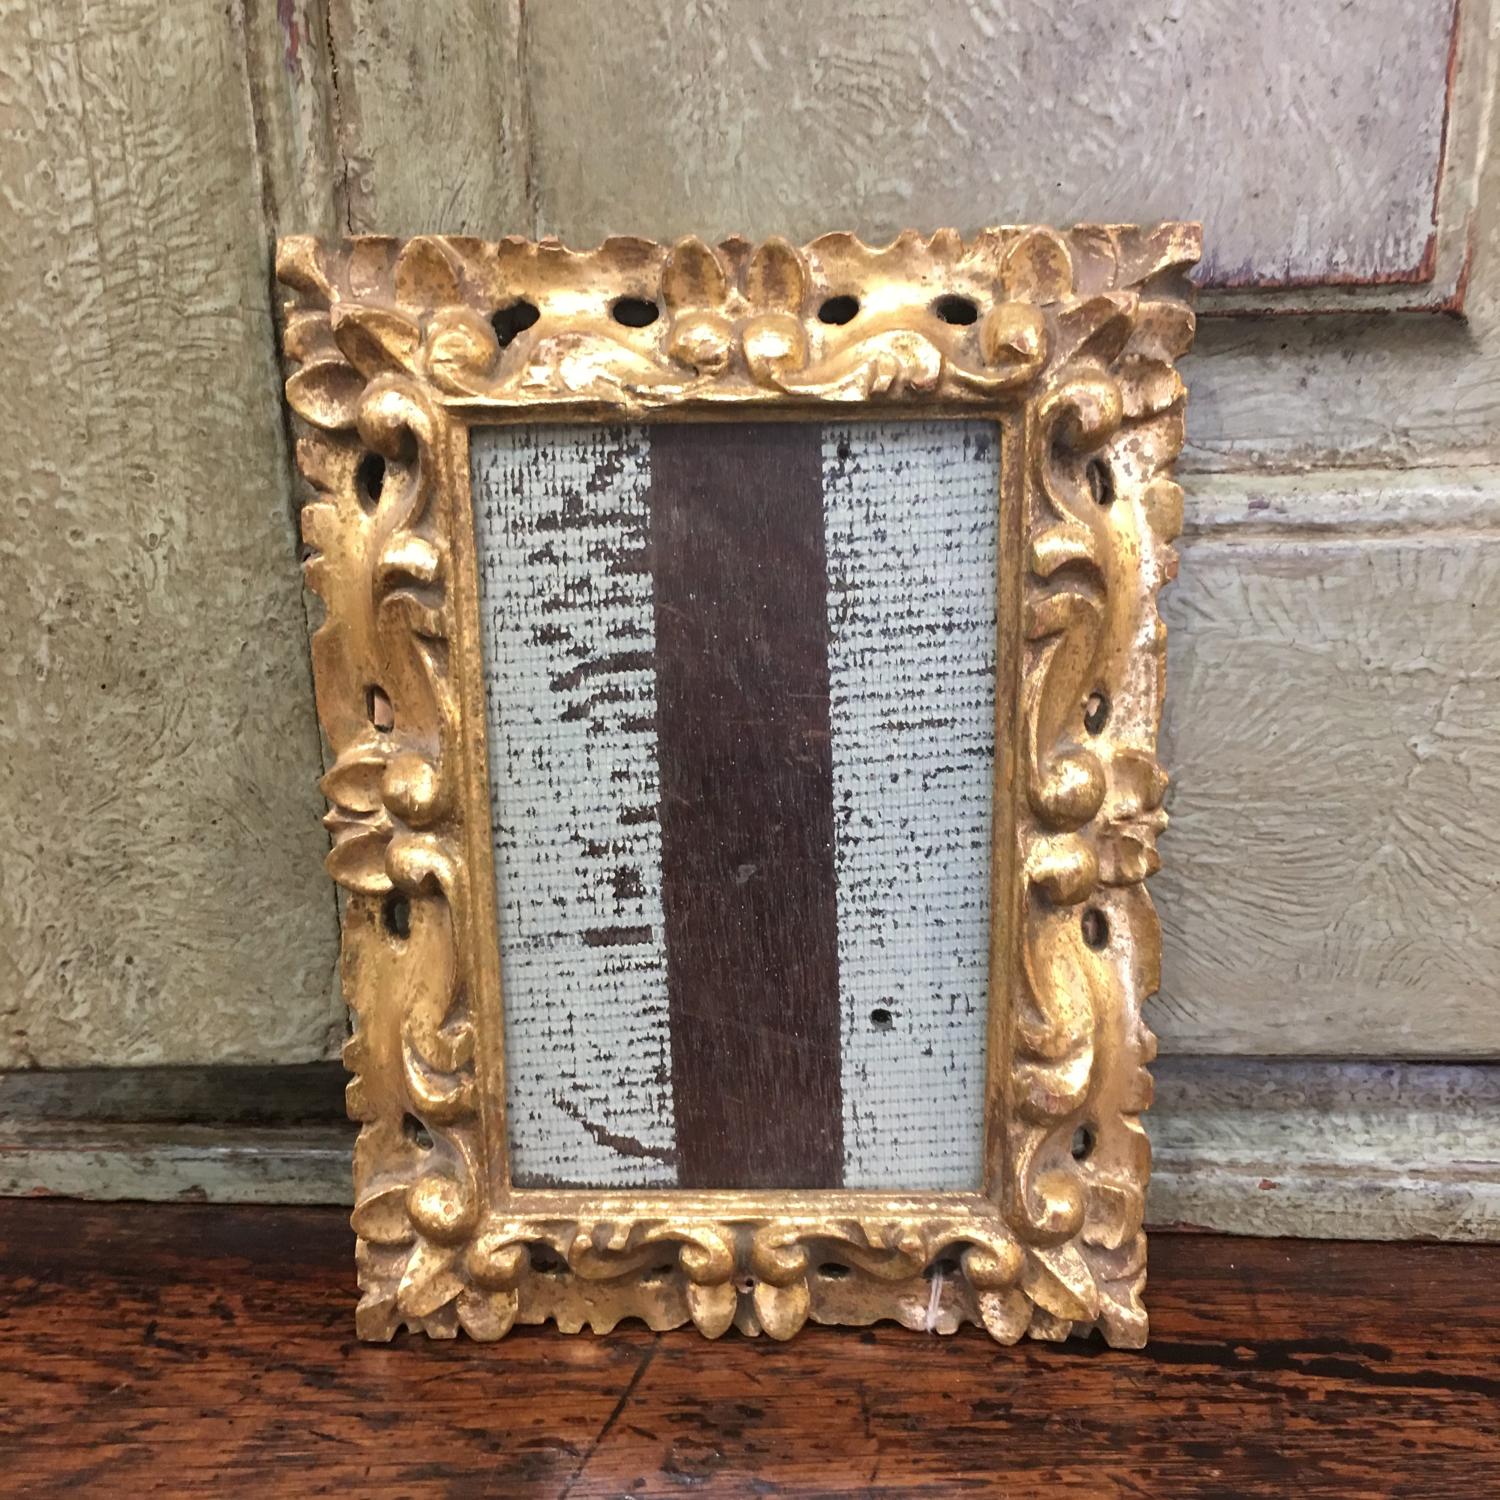 Early Florentine gilded wooden frame